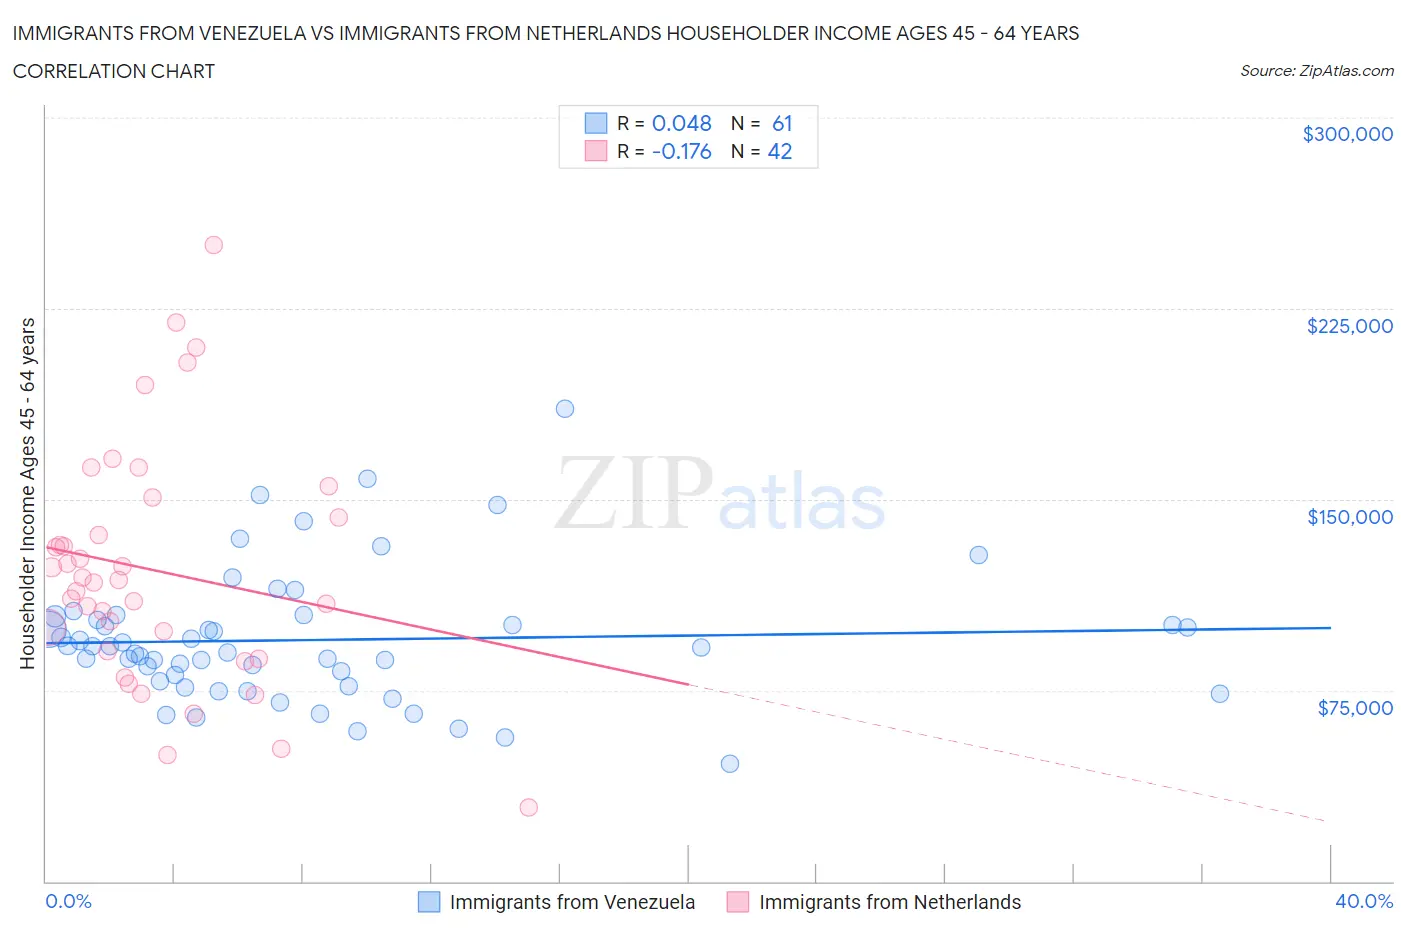 Immigrants from Venezuela vs Immigrants from Netherlands Householder Income Ages 45 - 64 years